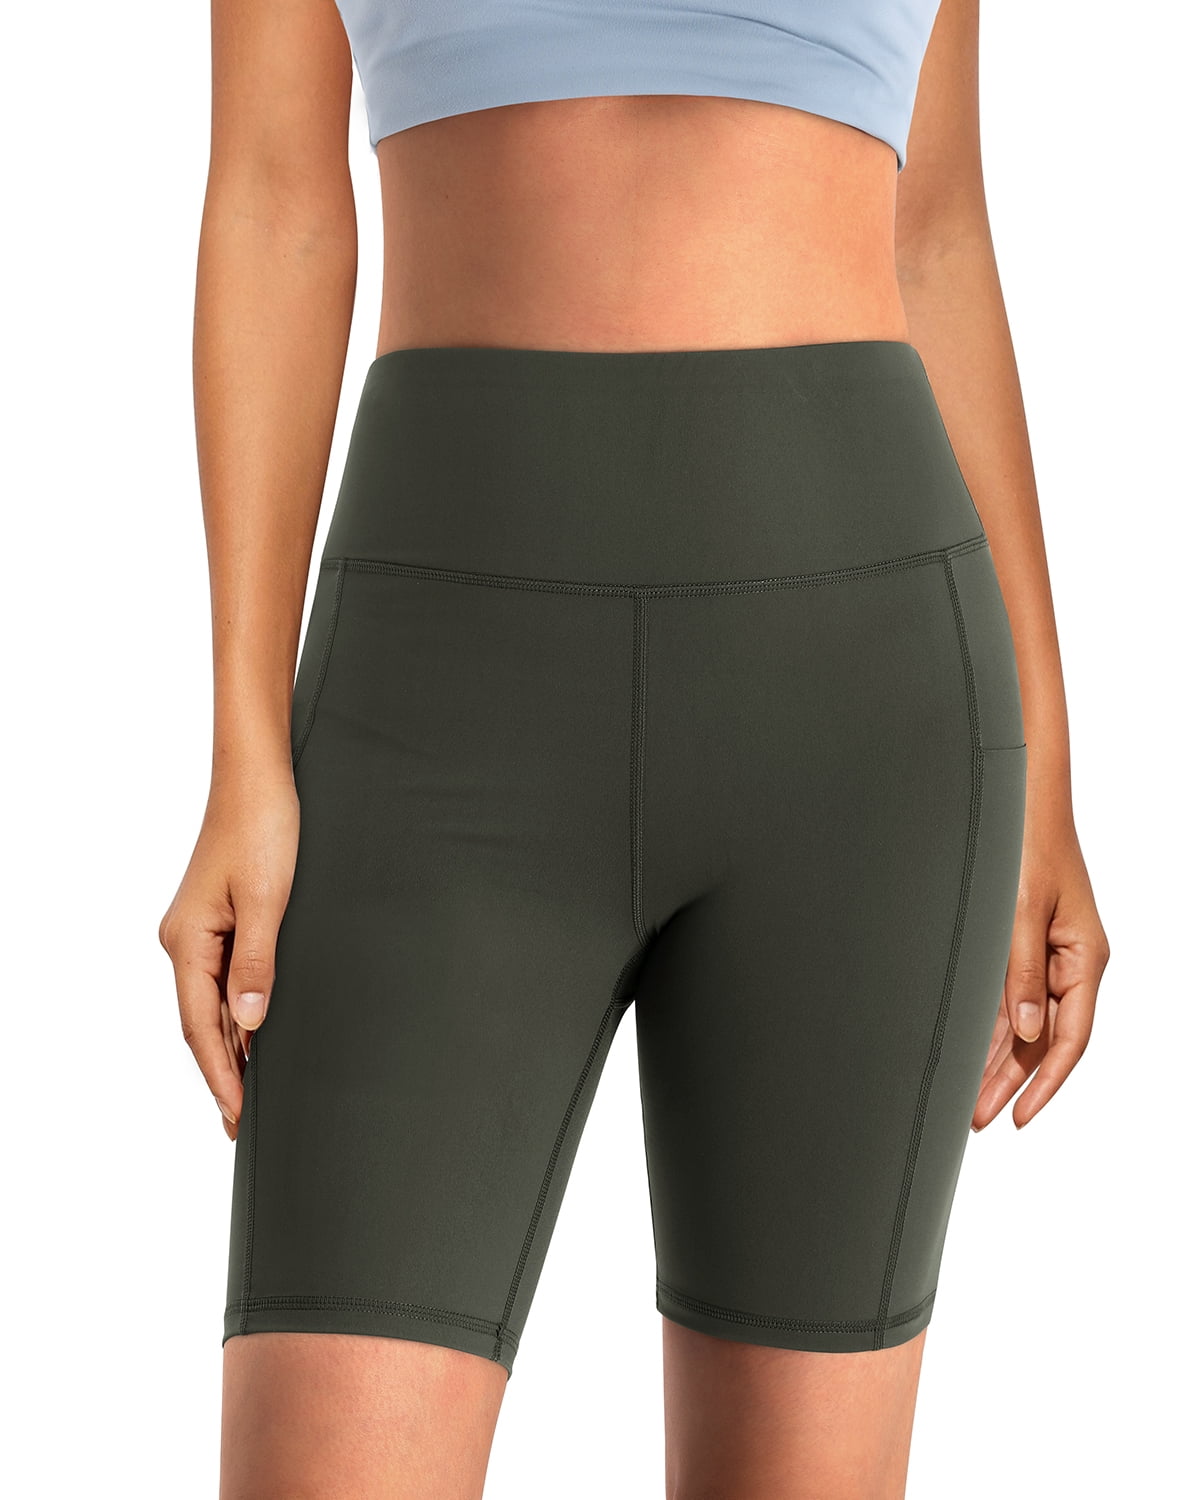 Promover Yoga Shorts with Pockets for Women Running Bike High